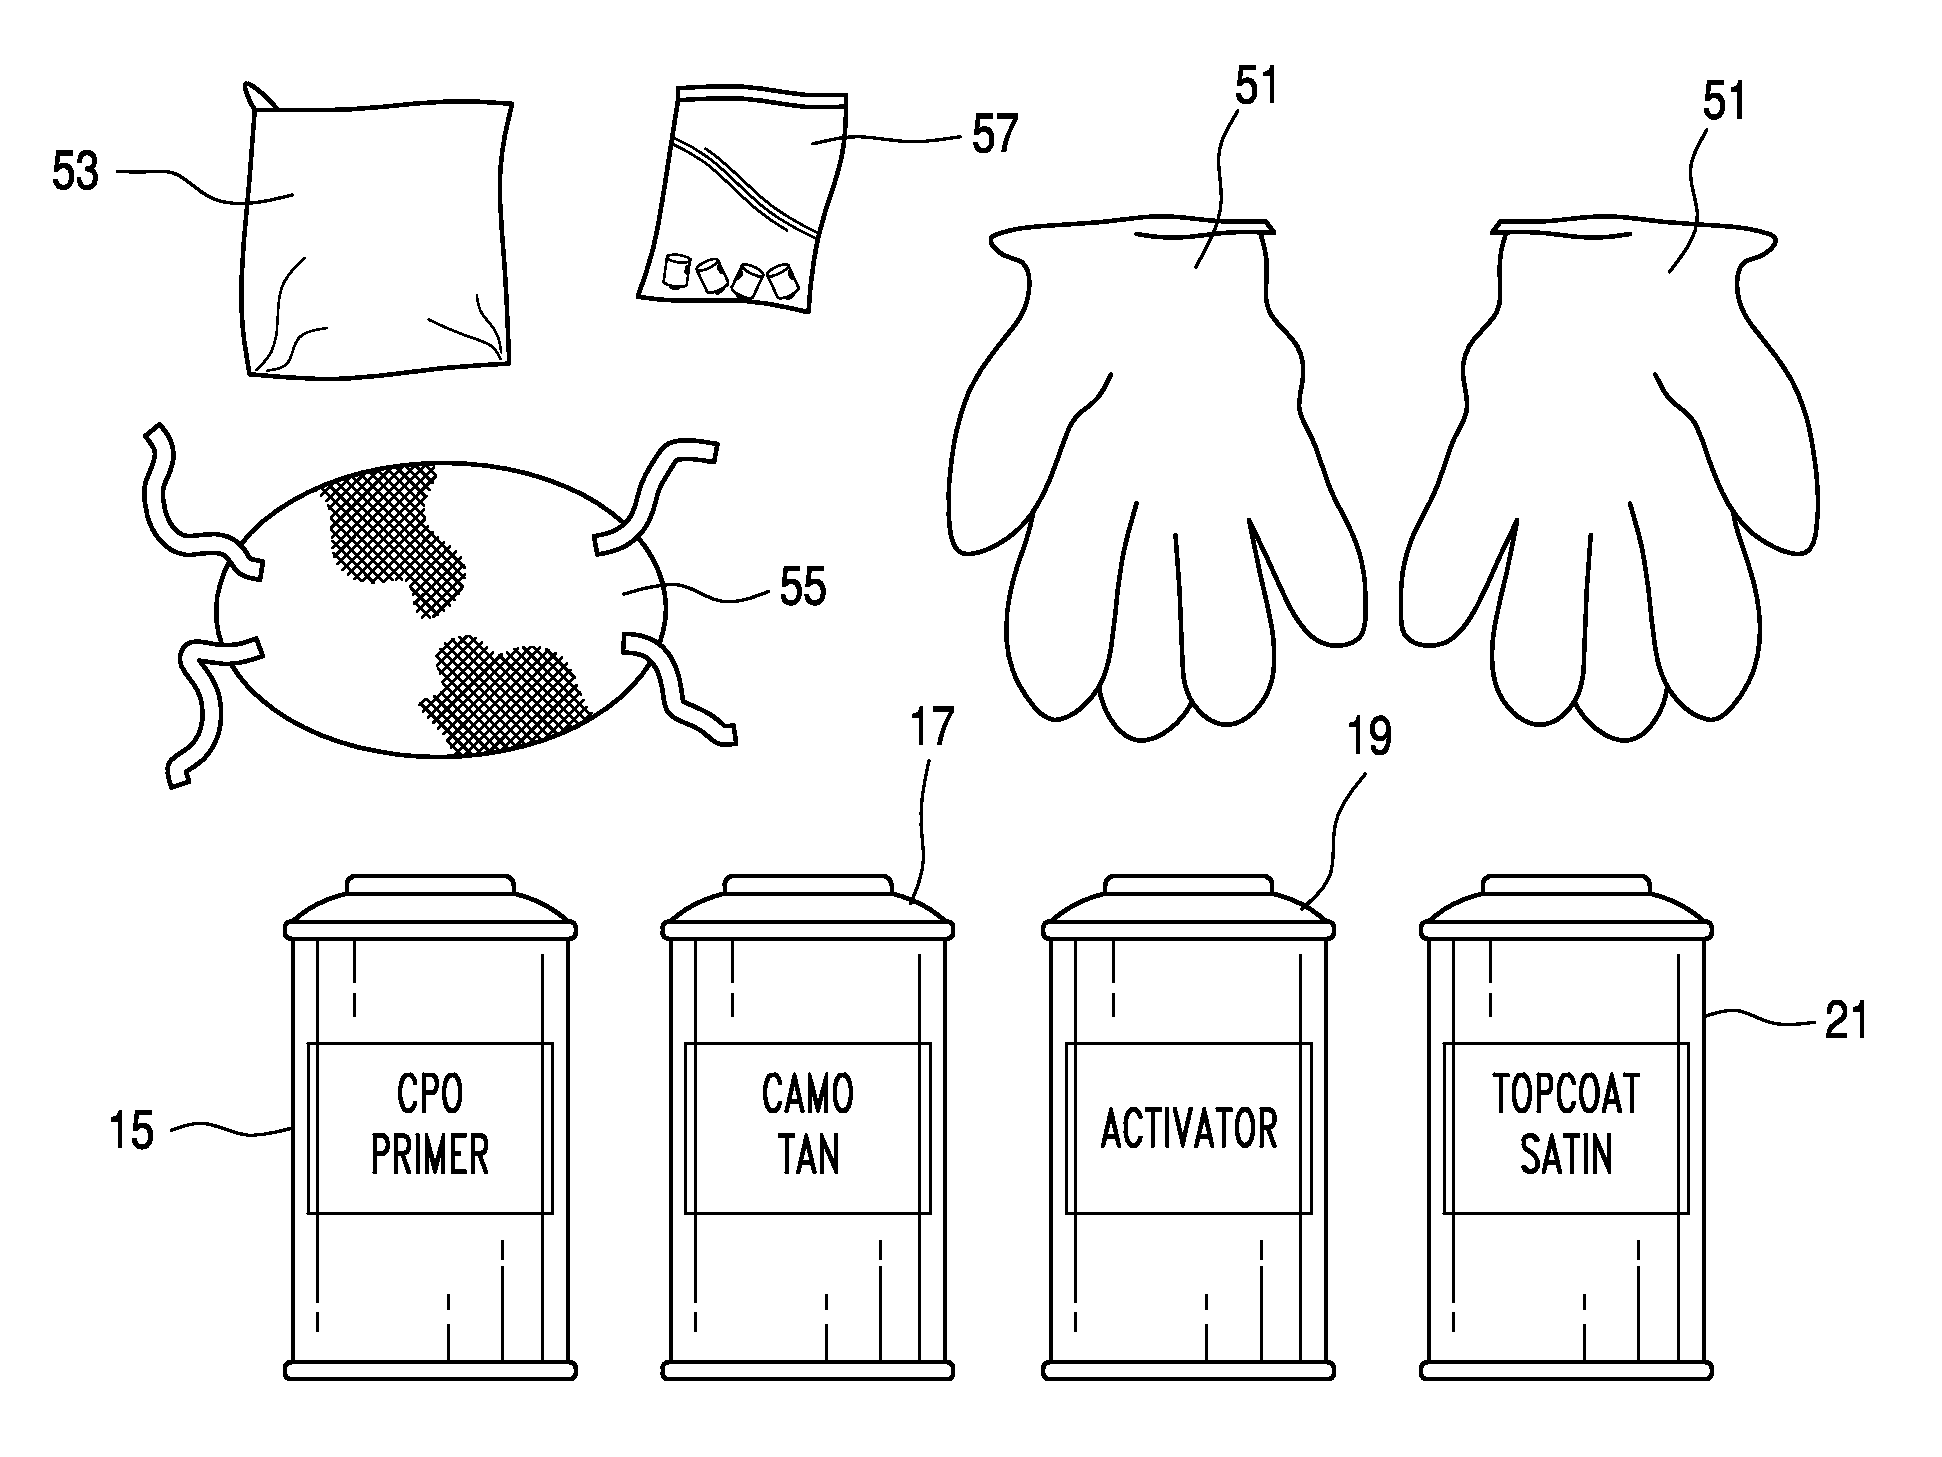 Kit for transferring an image onto an object